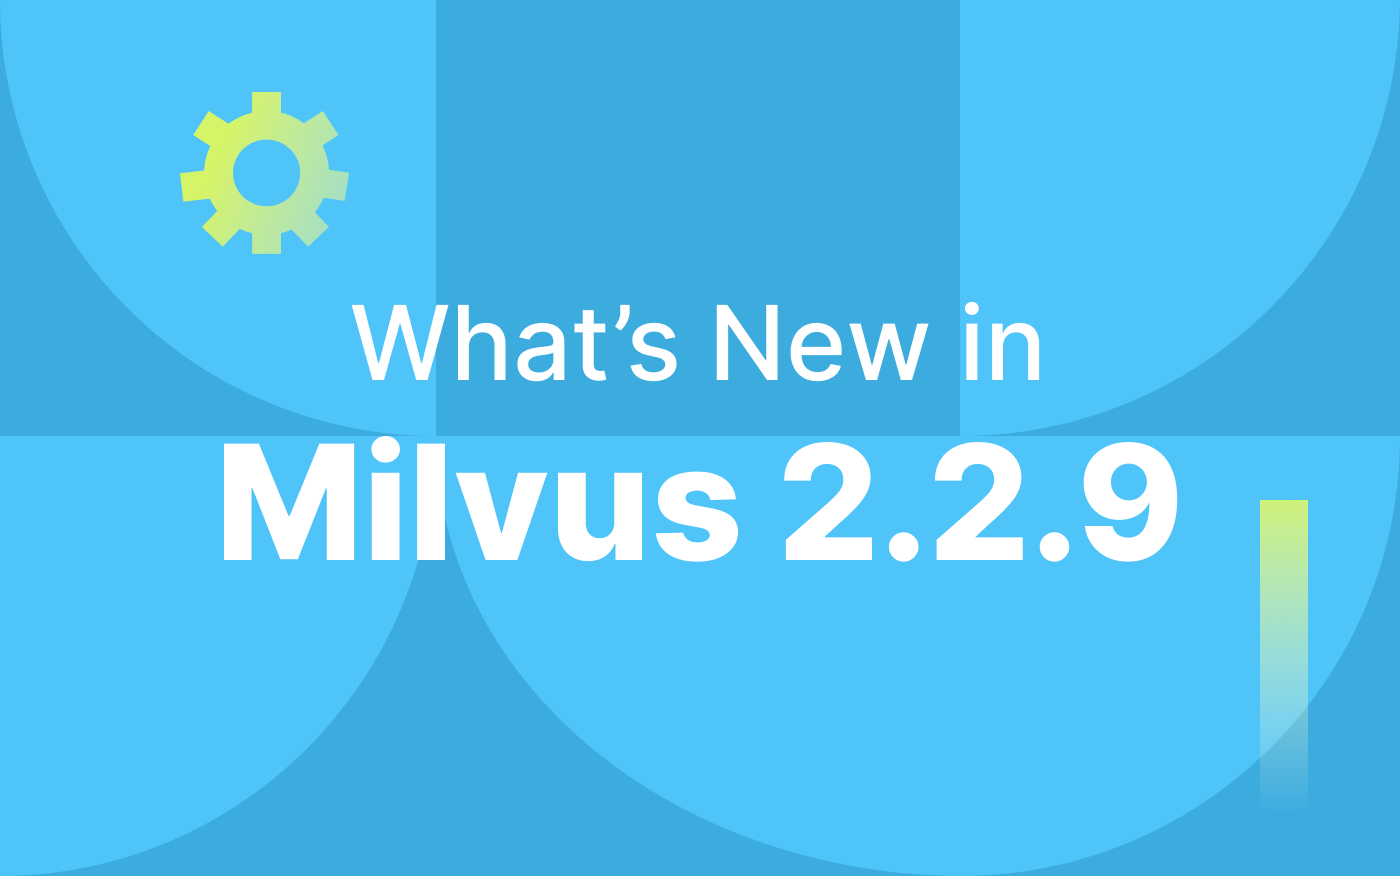 Milvus 2.2.9: A Highly Anticipated Release with Optimal User Experience
